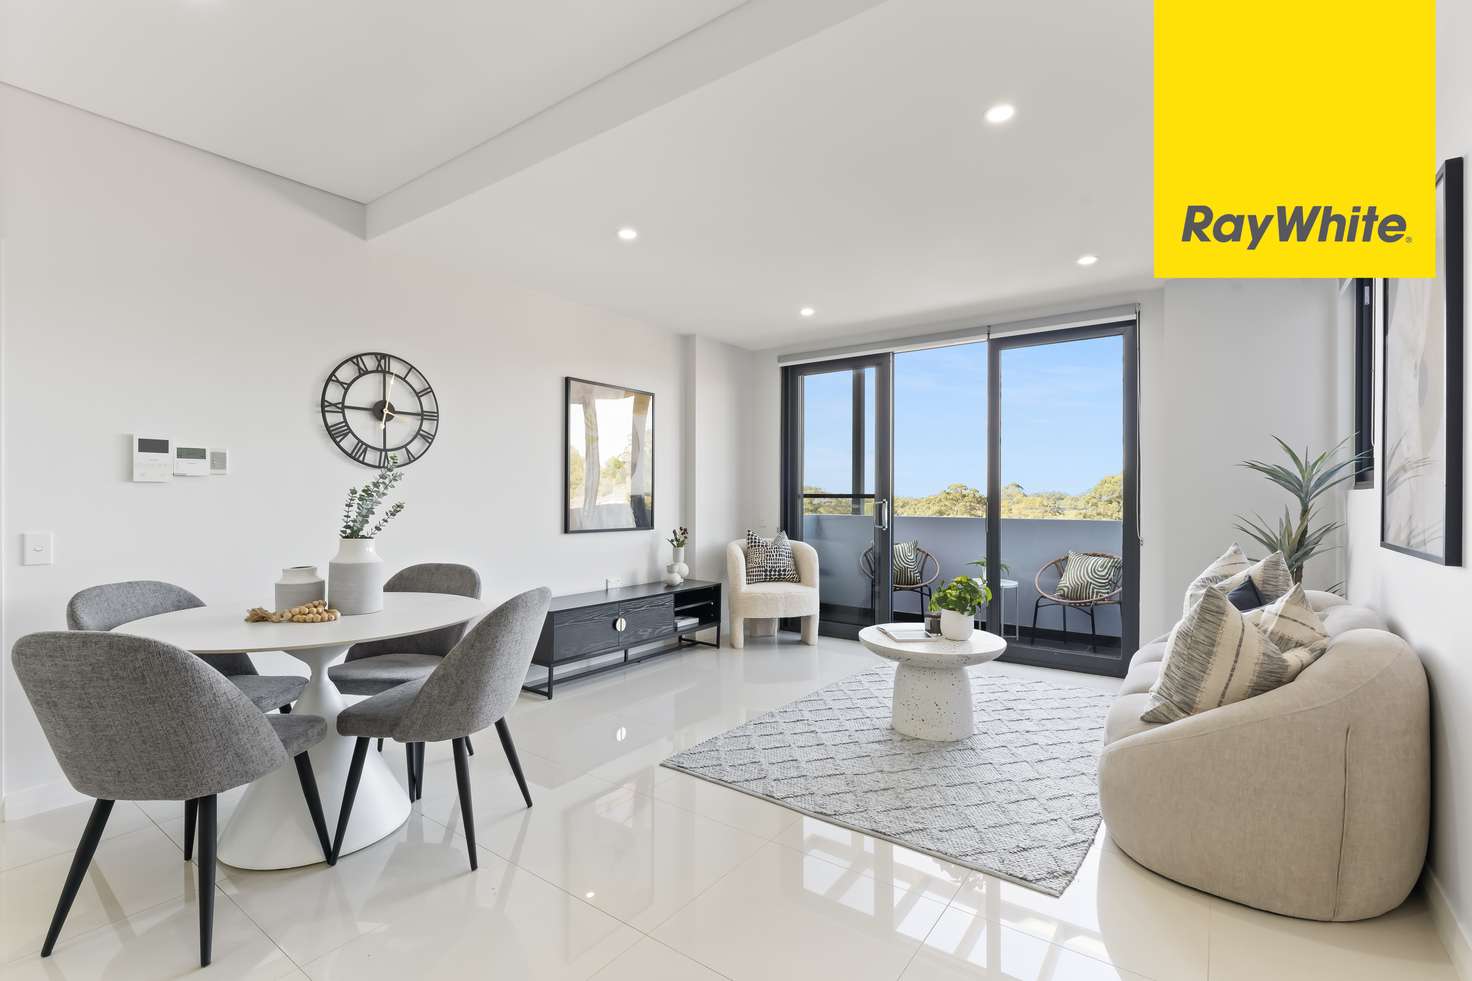 Main view of Homely apartment listing, 23/11-19 Thornleigh Street, Thornleigh NSW 2120